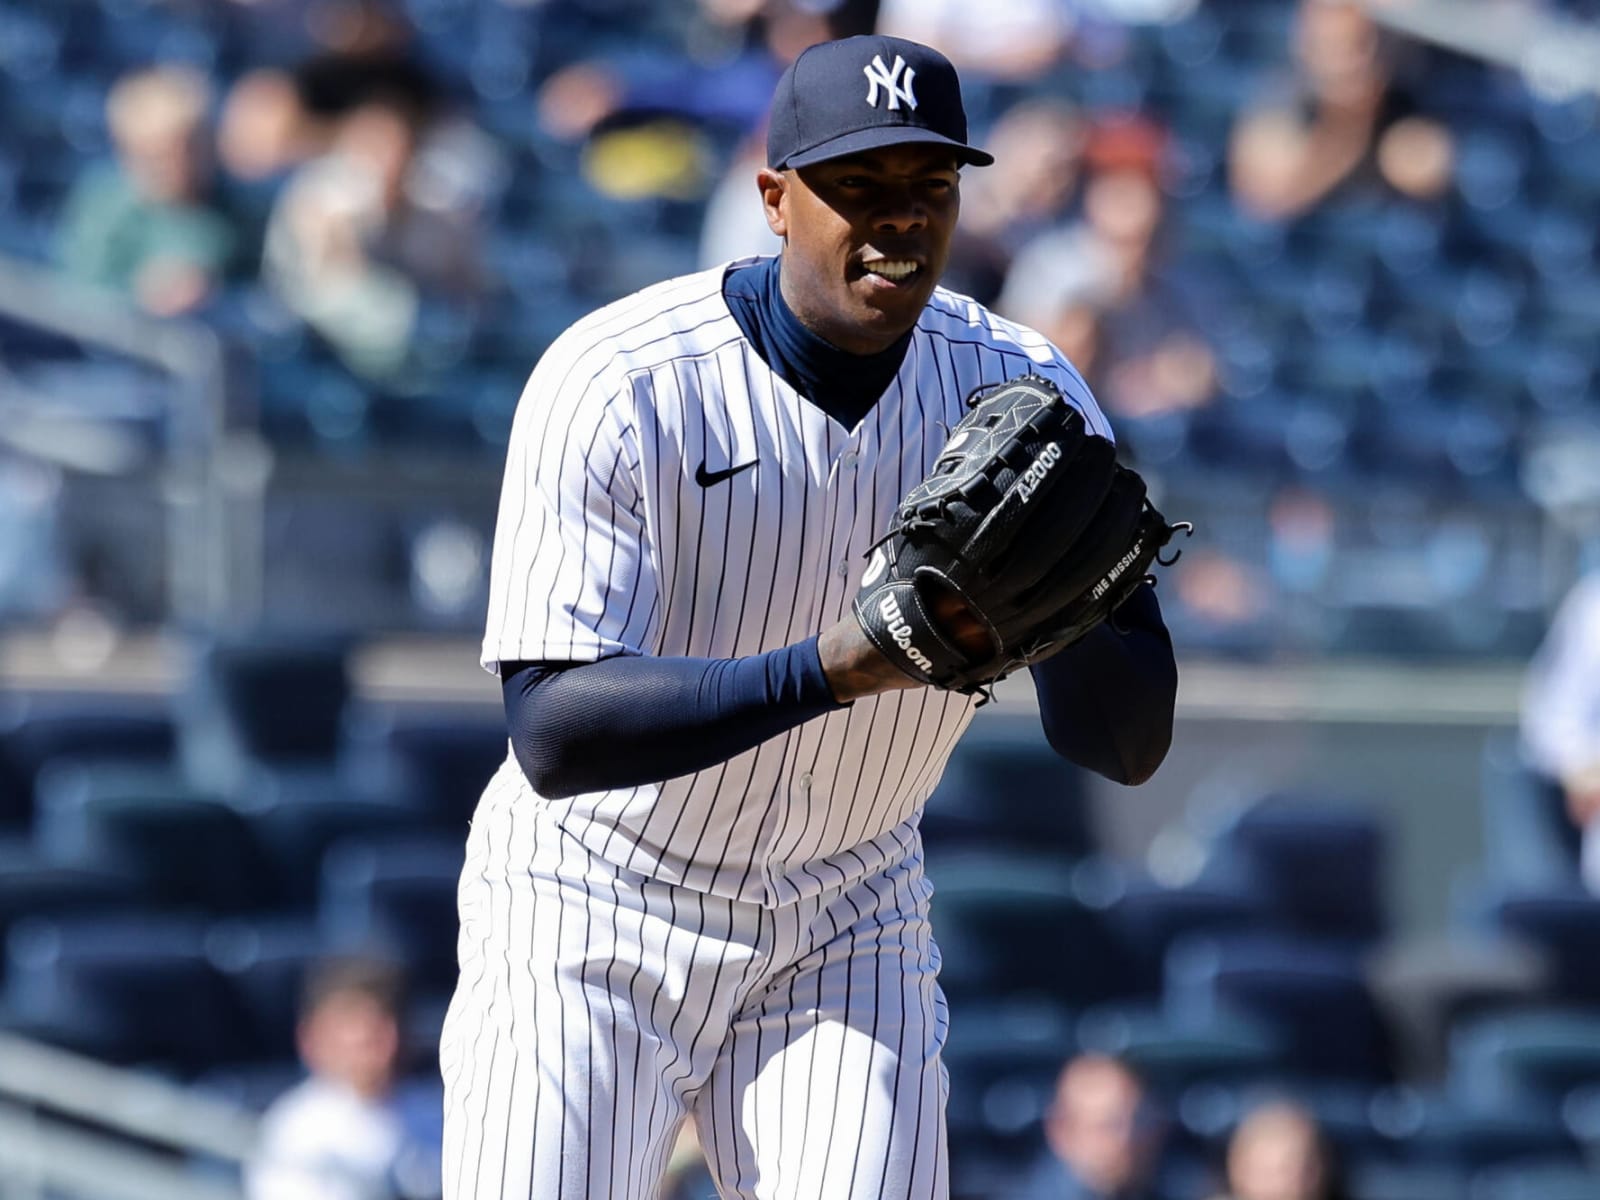 Aroldis Chapman turned down better offer to sign with Royals